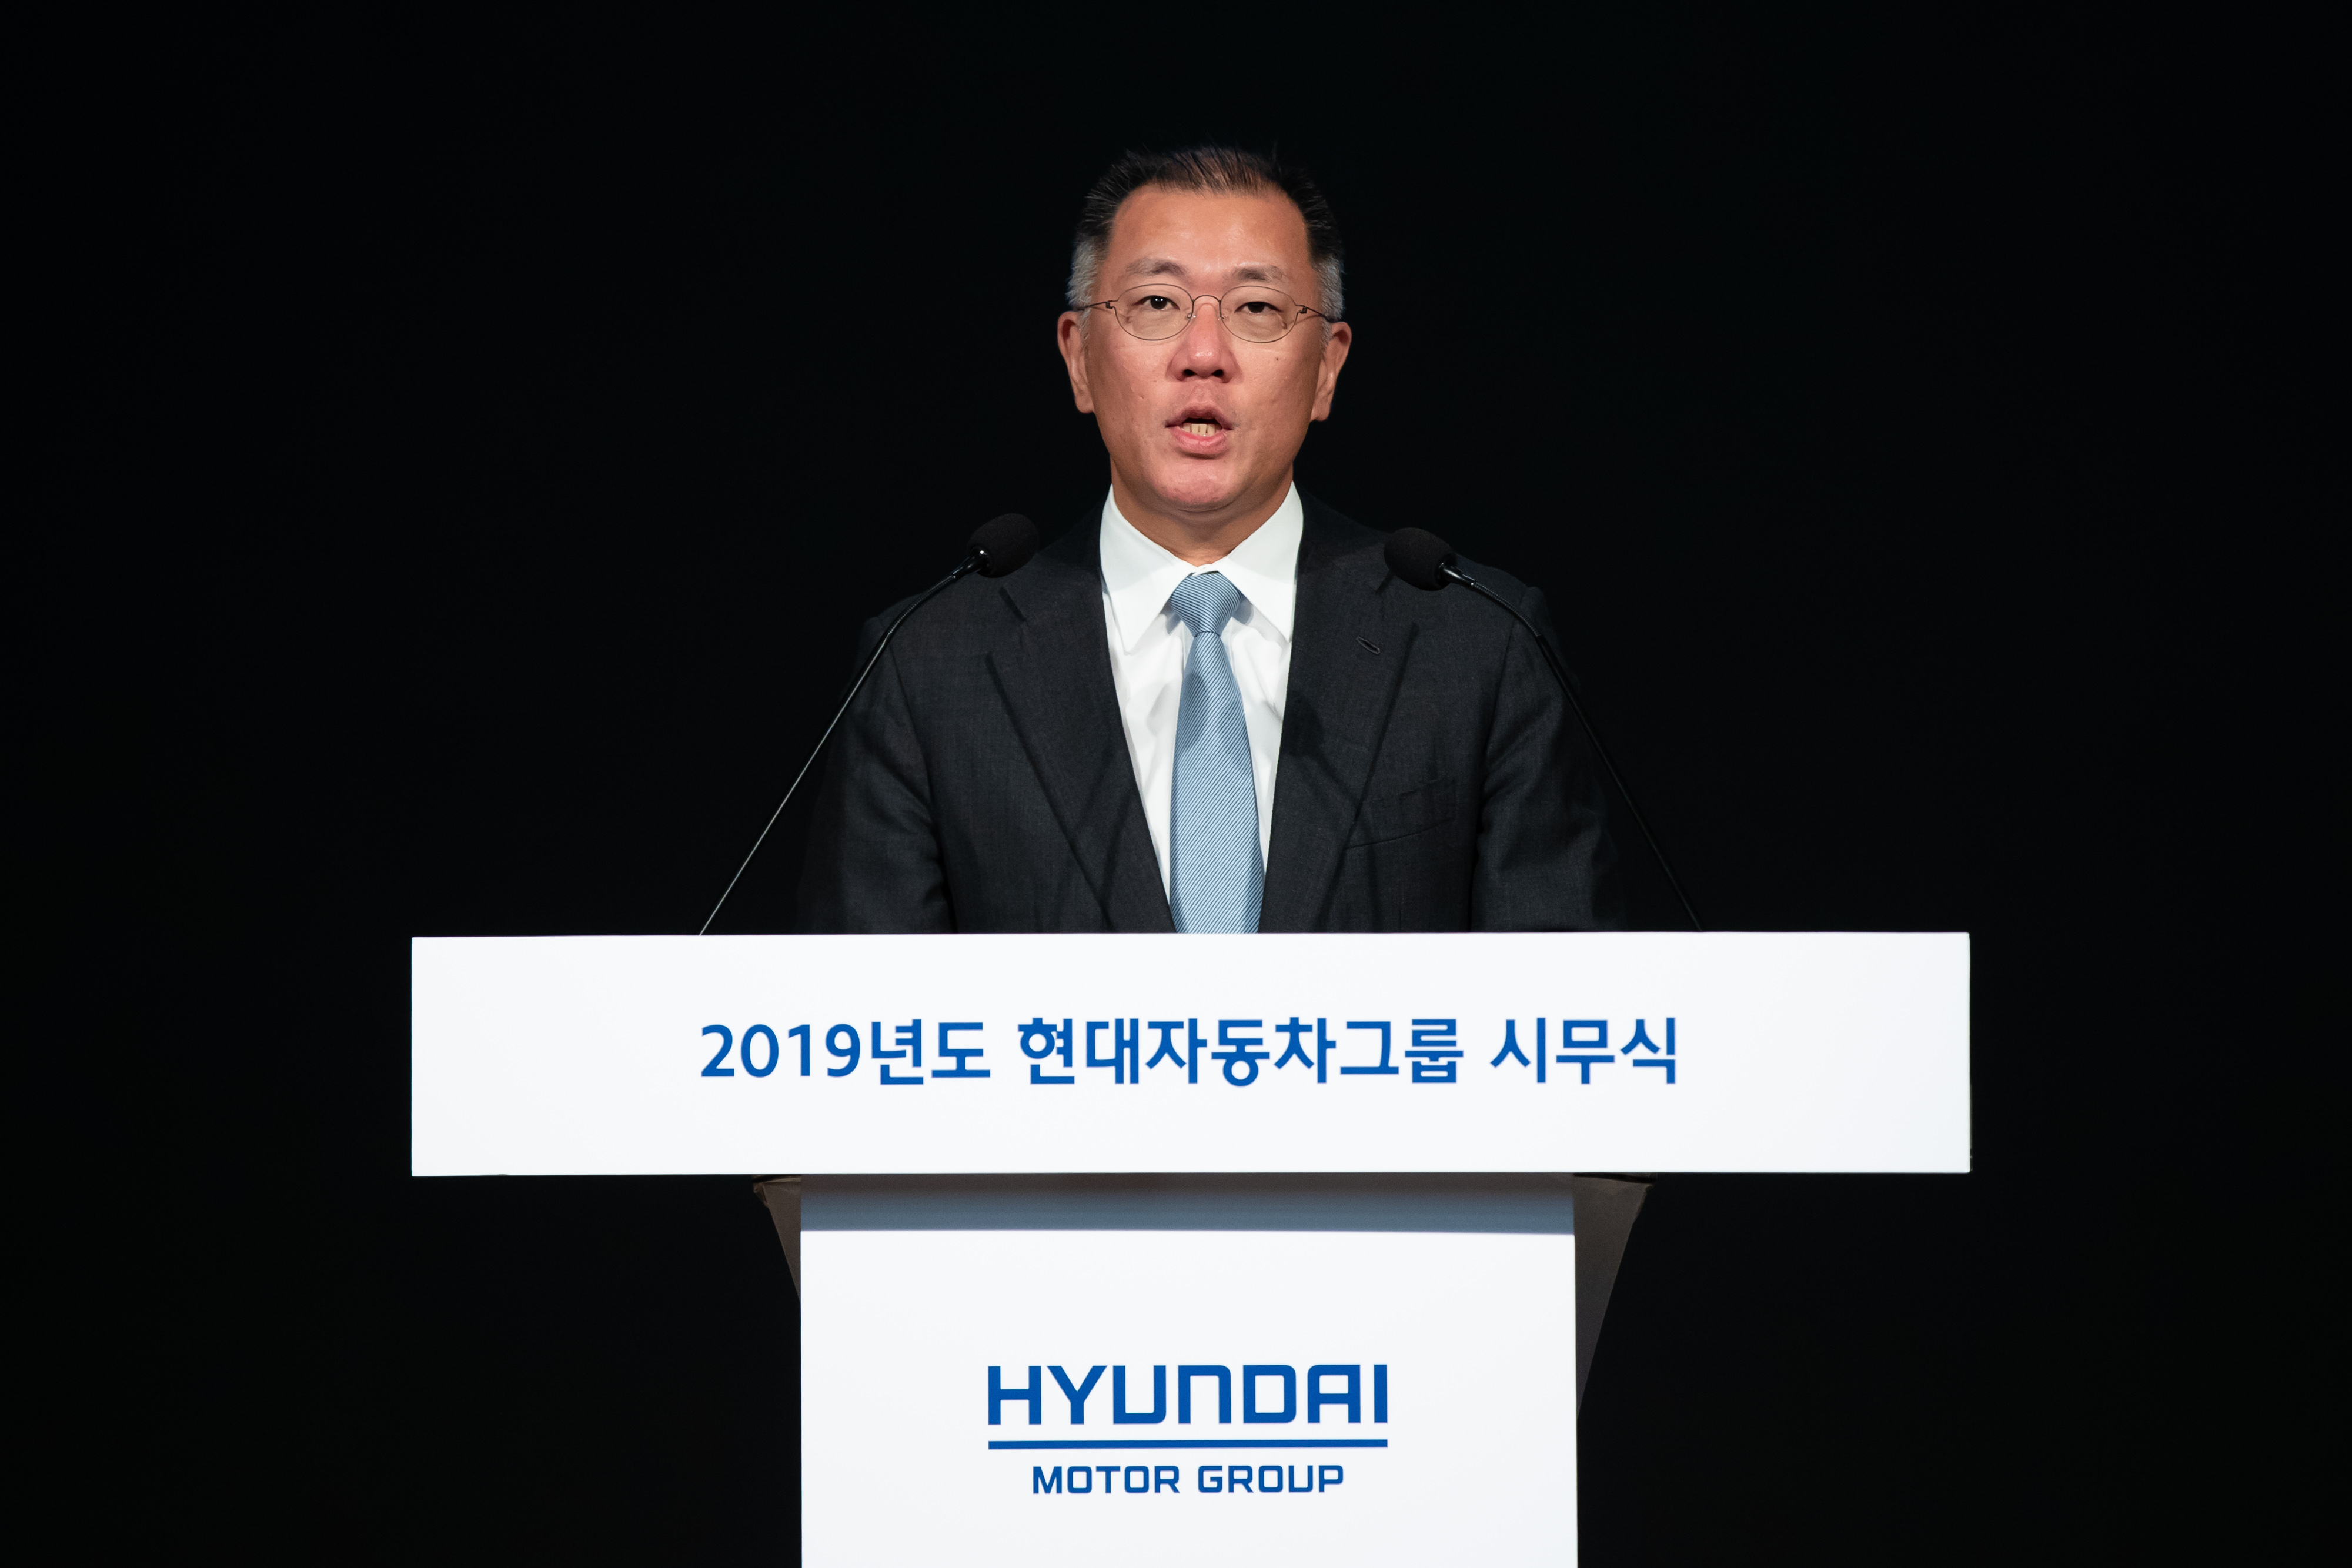 Don’t Chuck Your Driver’s License Just Yet, Hyundai Chief Says - Bloomberg